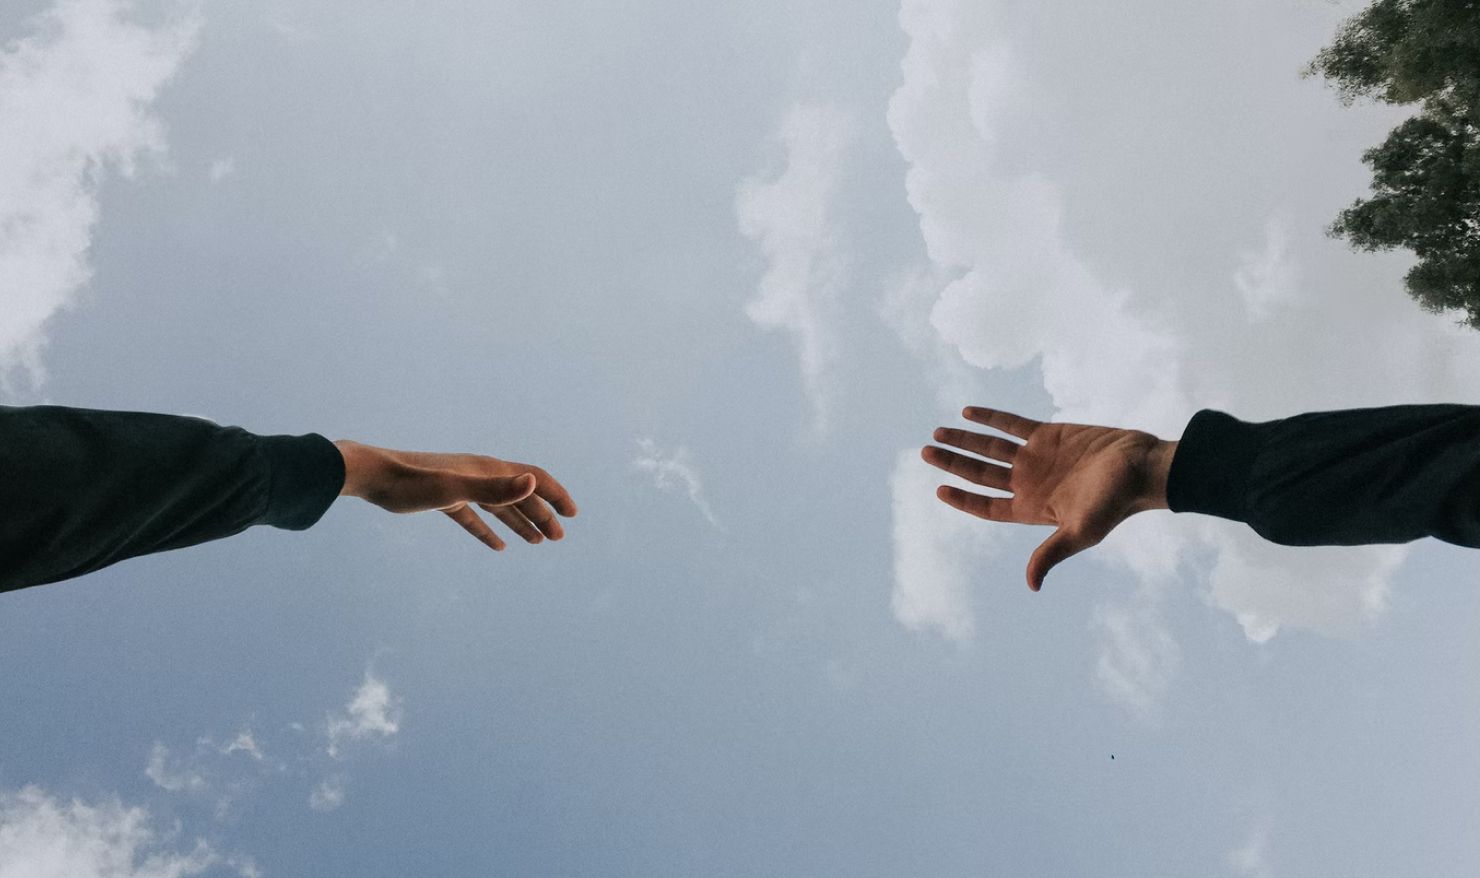 Two people's hands reaching out towards each other in friendship from opposite sides, seen from below against a blue sky.Two people's hands reaching out towards each other in friendship from opposite sides, seen from below against a blue sky.